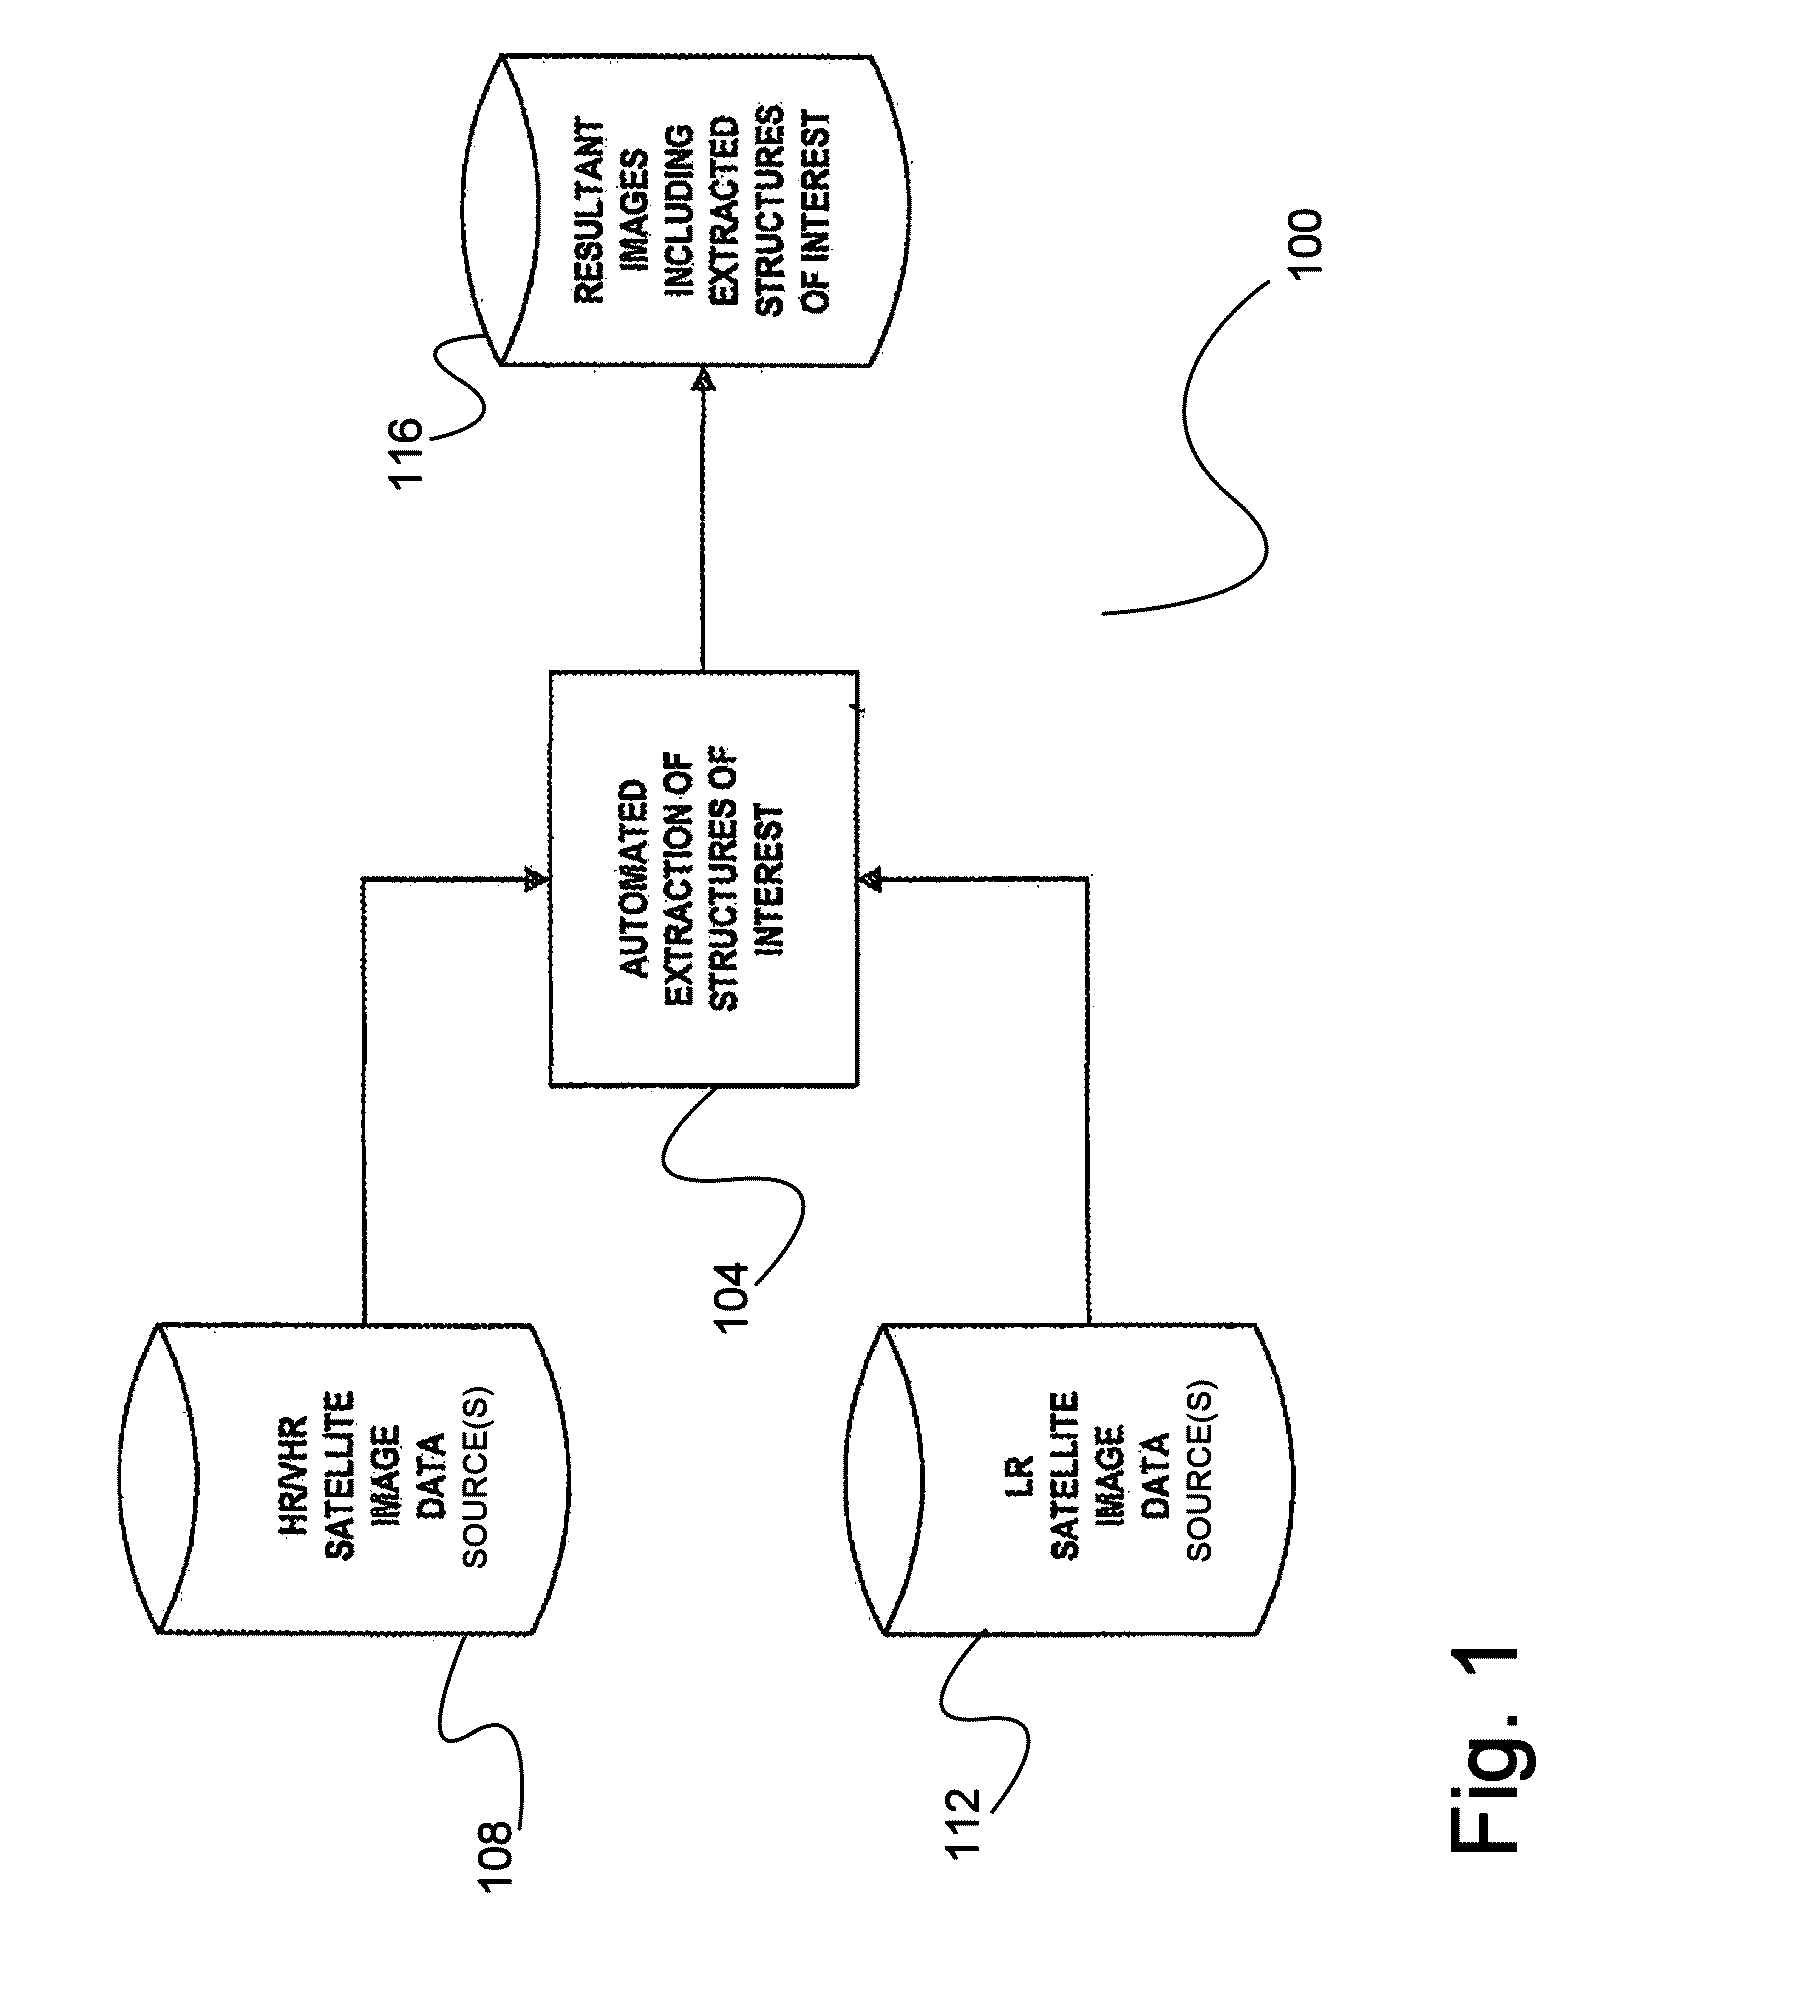 System and method for combining geographical and economic data extracted from satellite imagery for use in predictive modeling